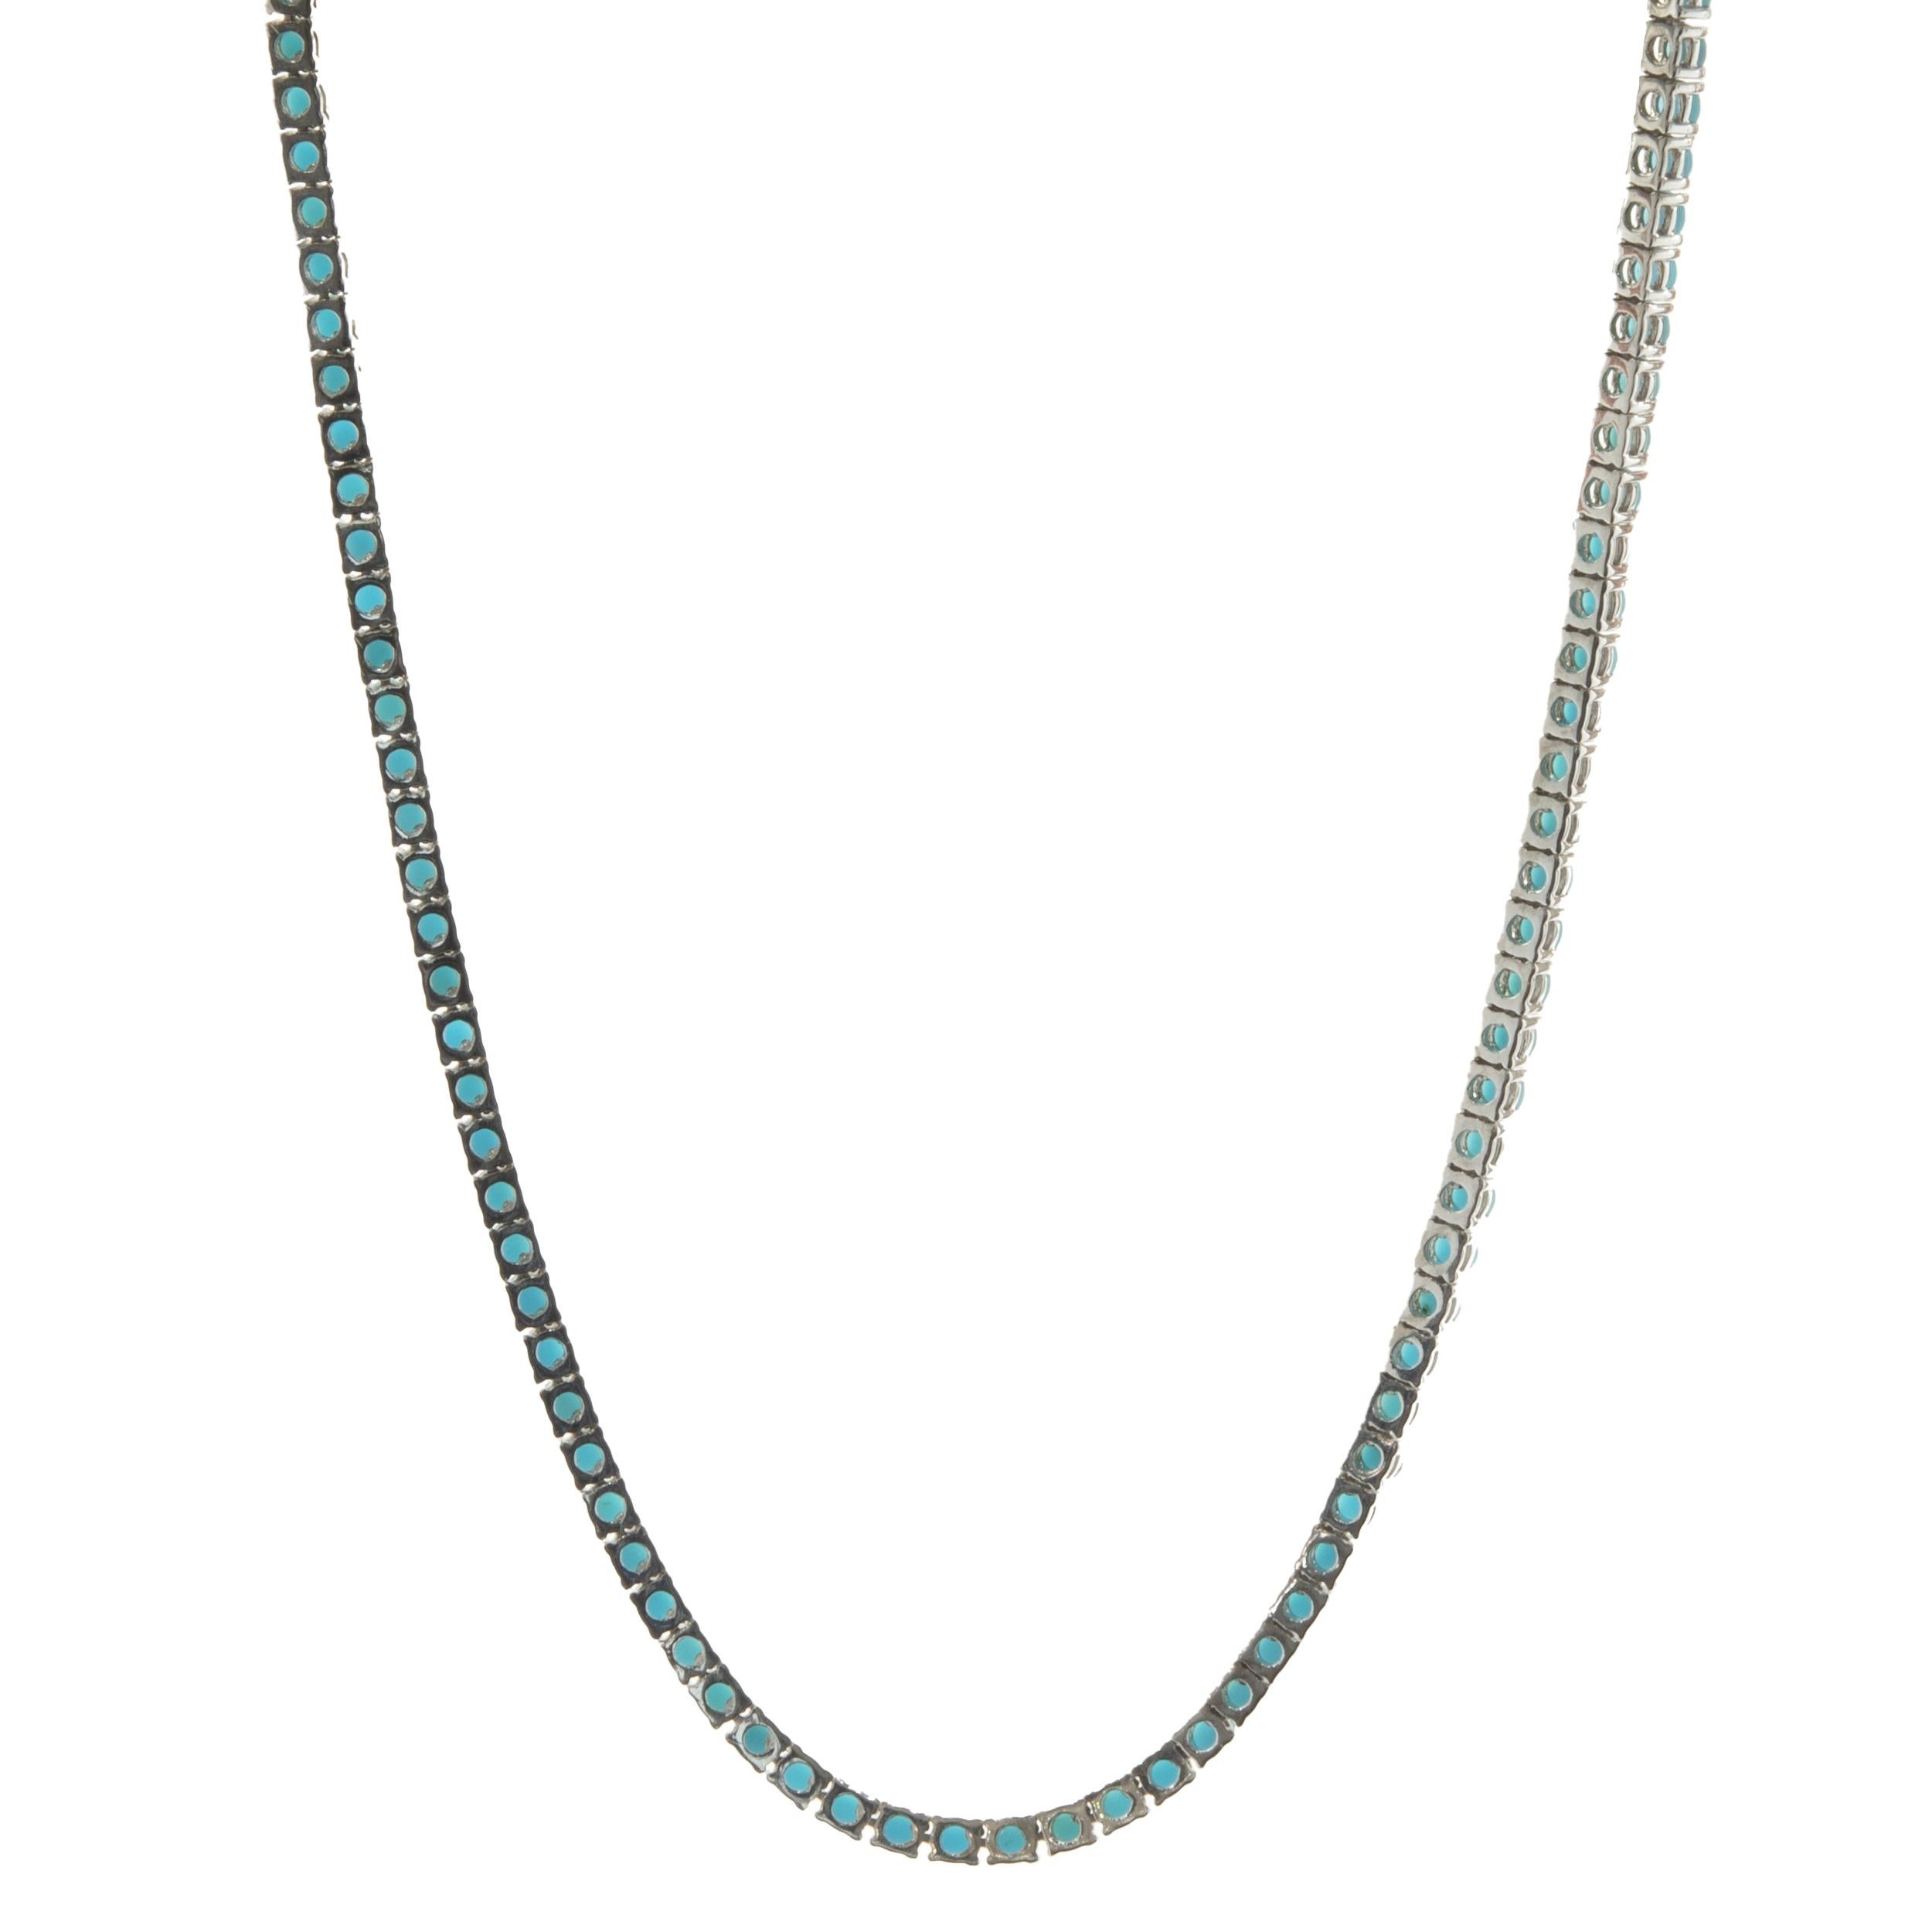 Designer: custom
Material: 14K white gold
Turquoise: 5.30cttw
Dimensions: necklace adjust from 18-inches
Weight: 9.55 grams